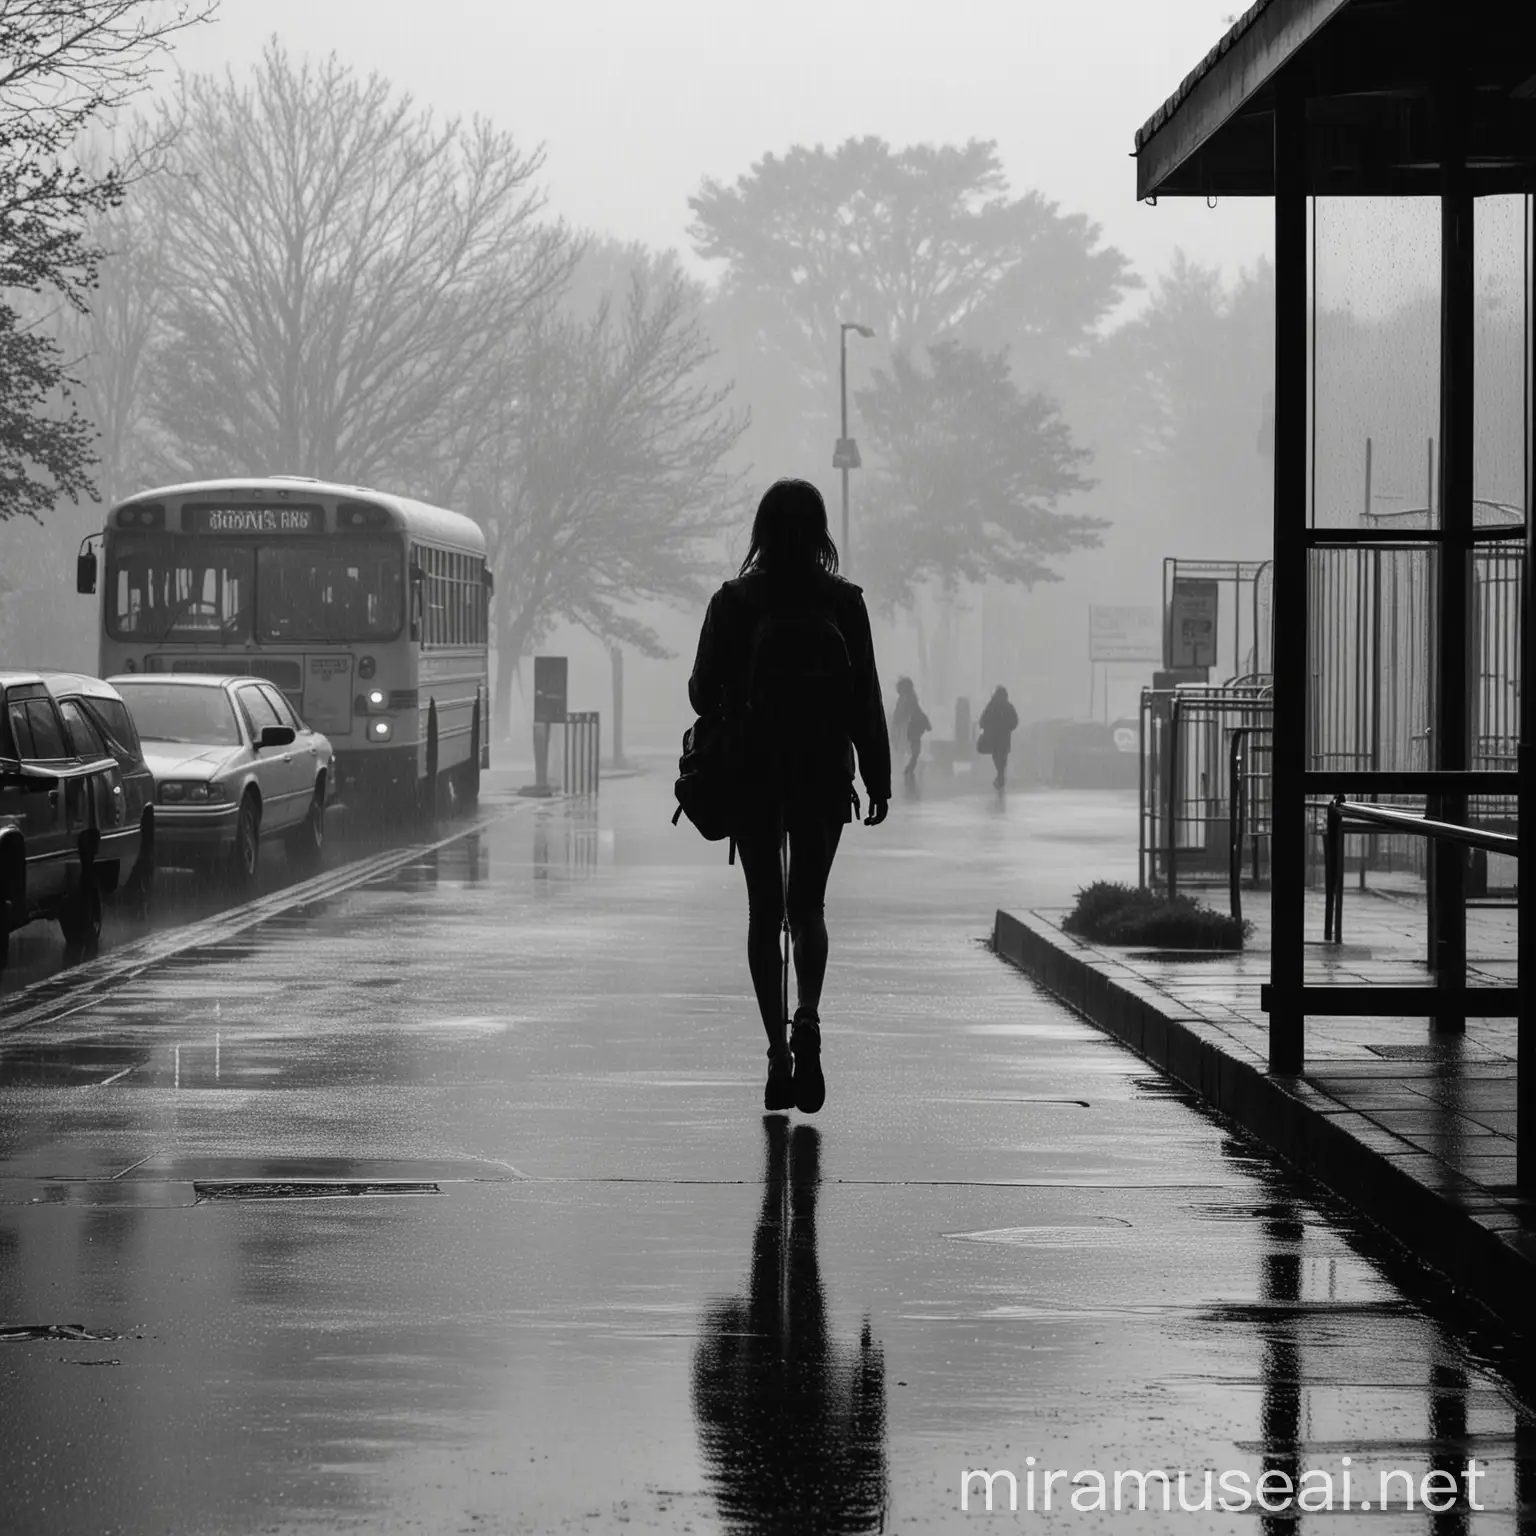 Silhouette of Girl Walking to Bus Stop in Rainy School Day